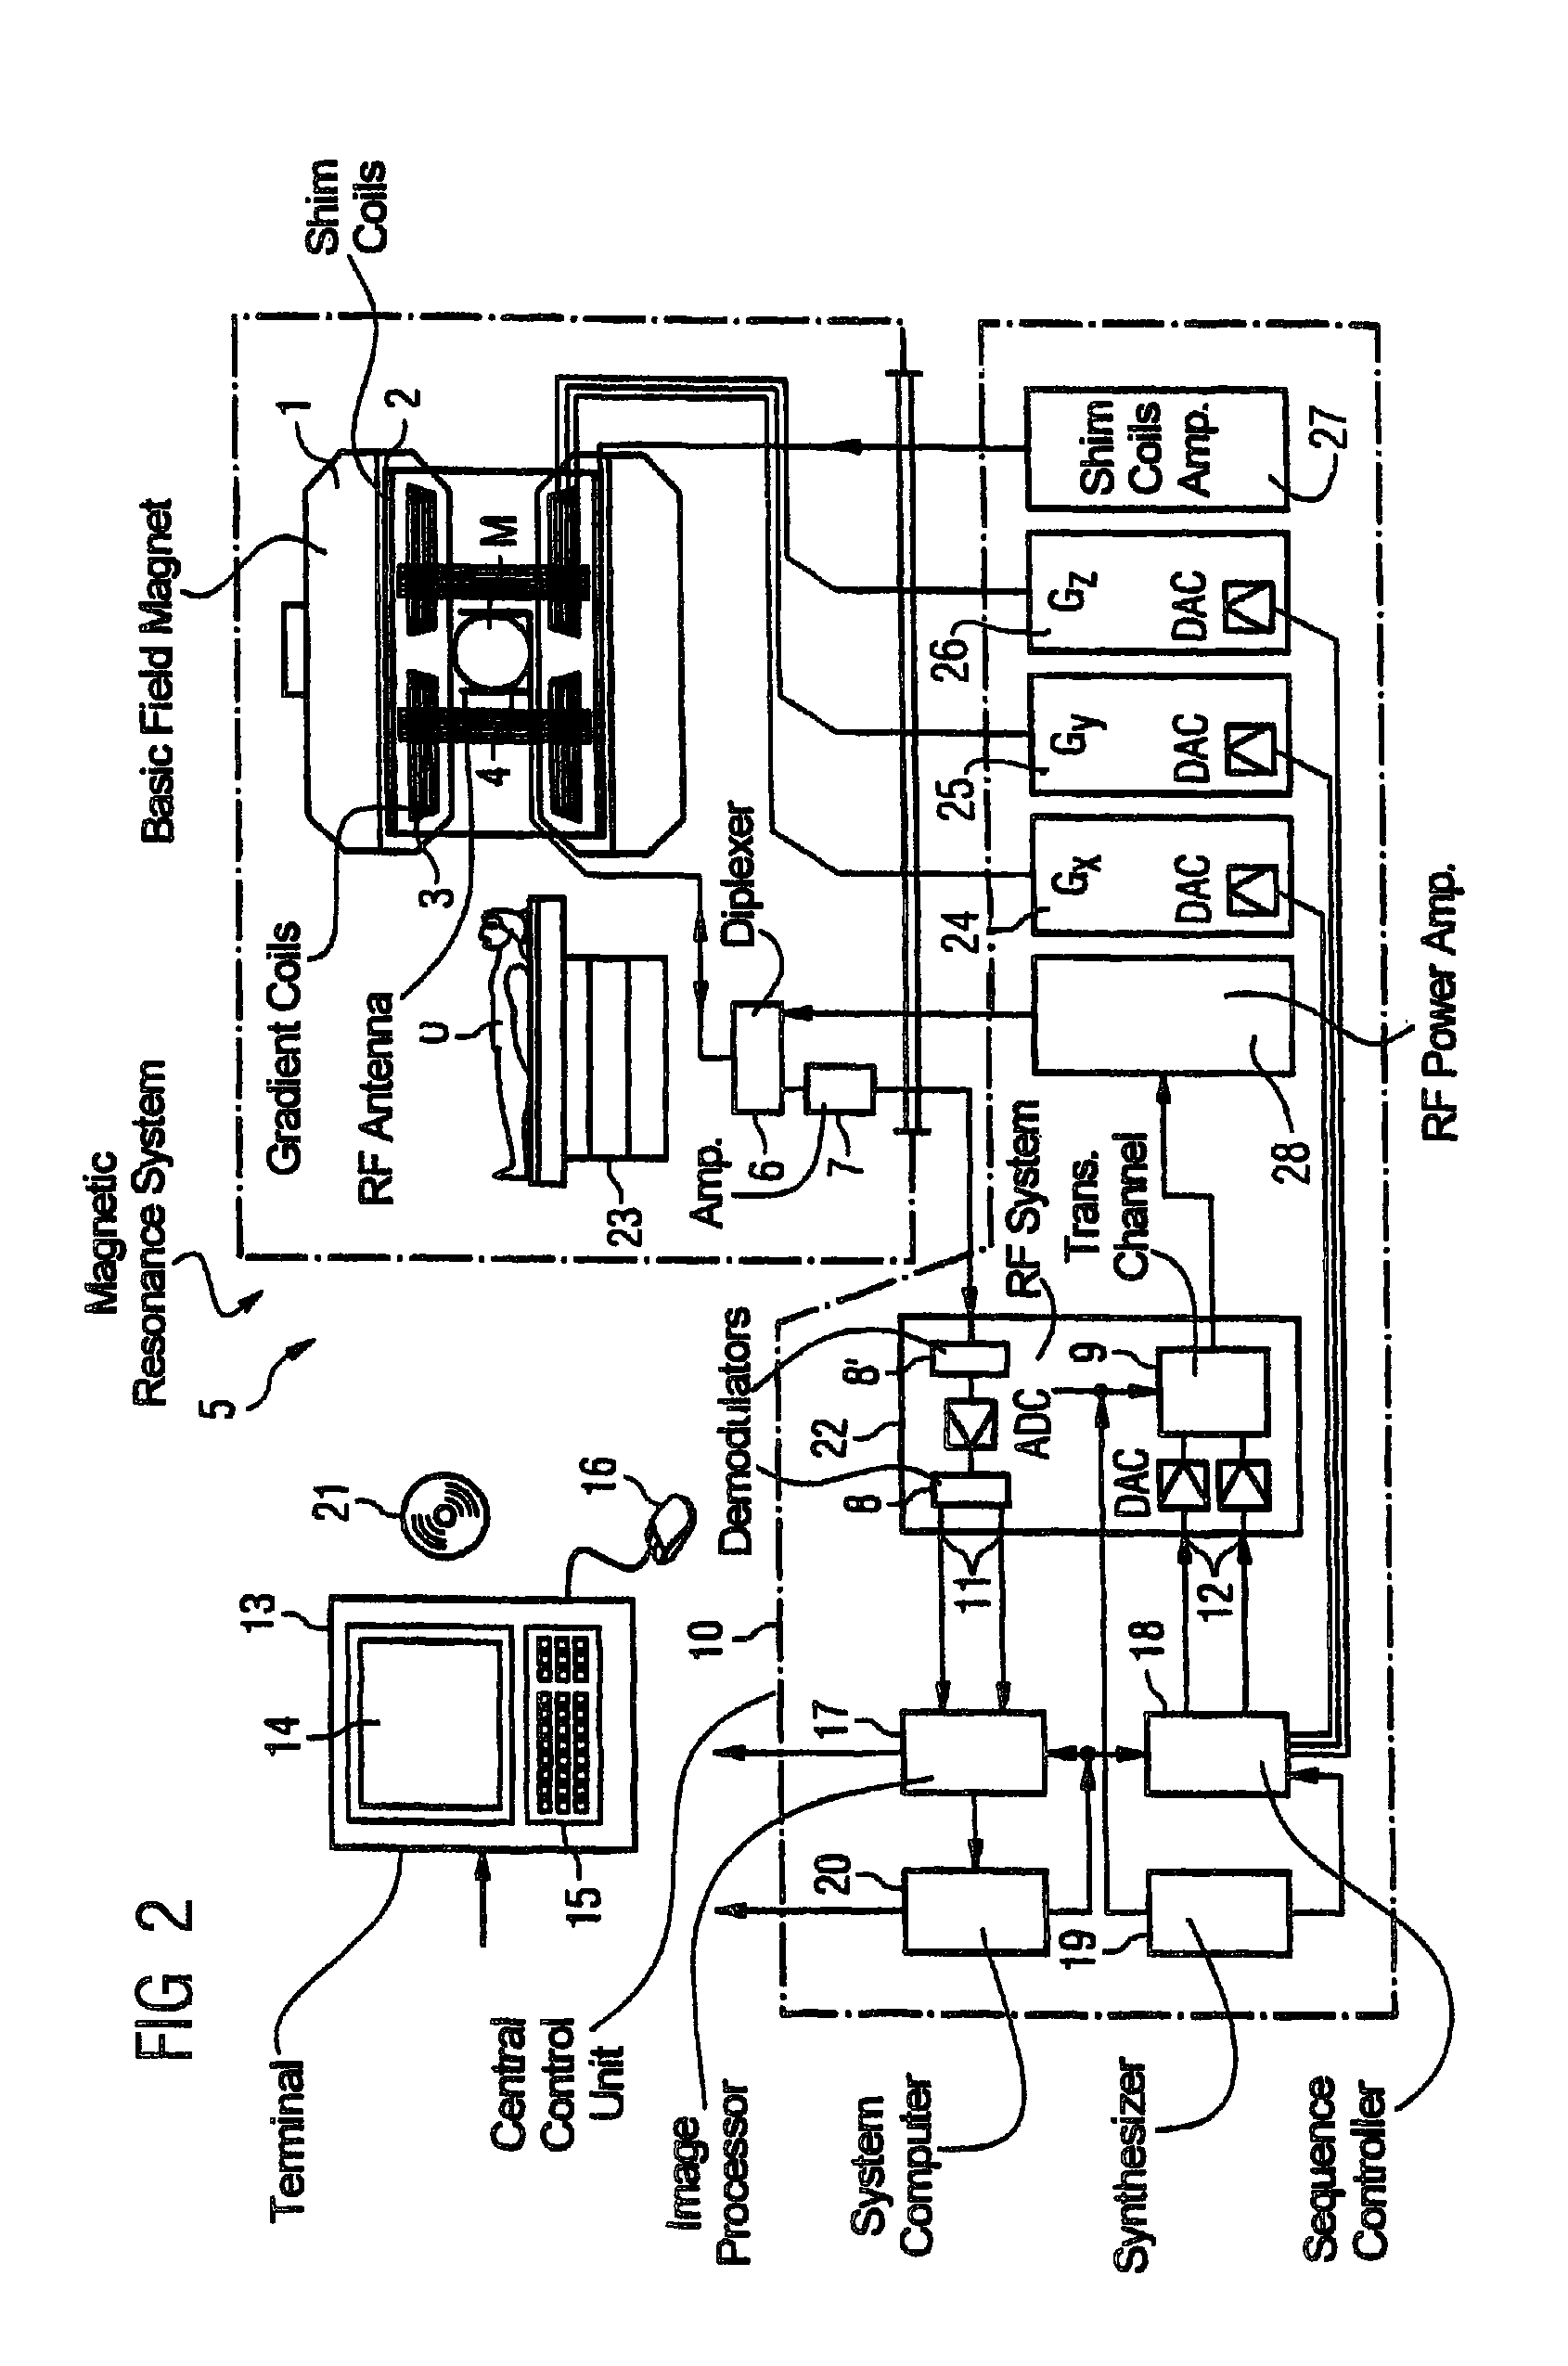 Method to generate magnetic resonance measurement data with image contrast selected and produced by preparation pulses